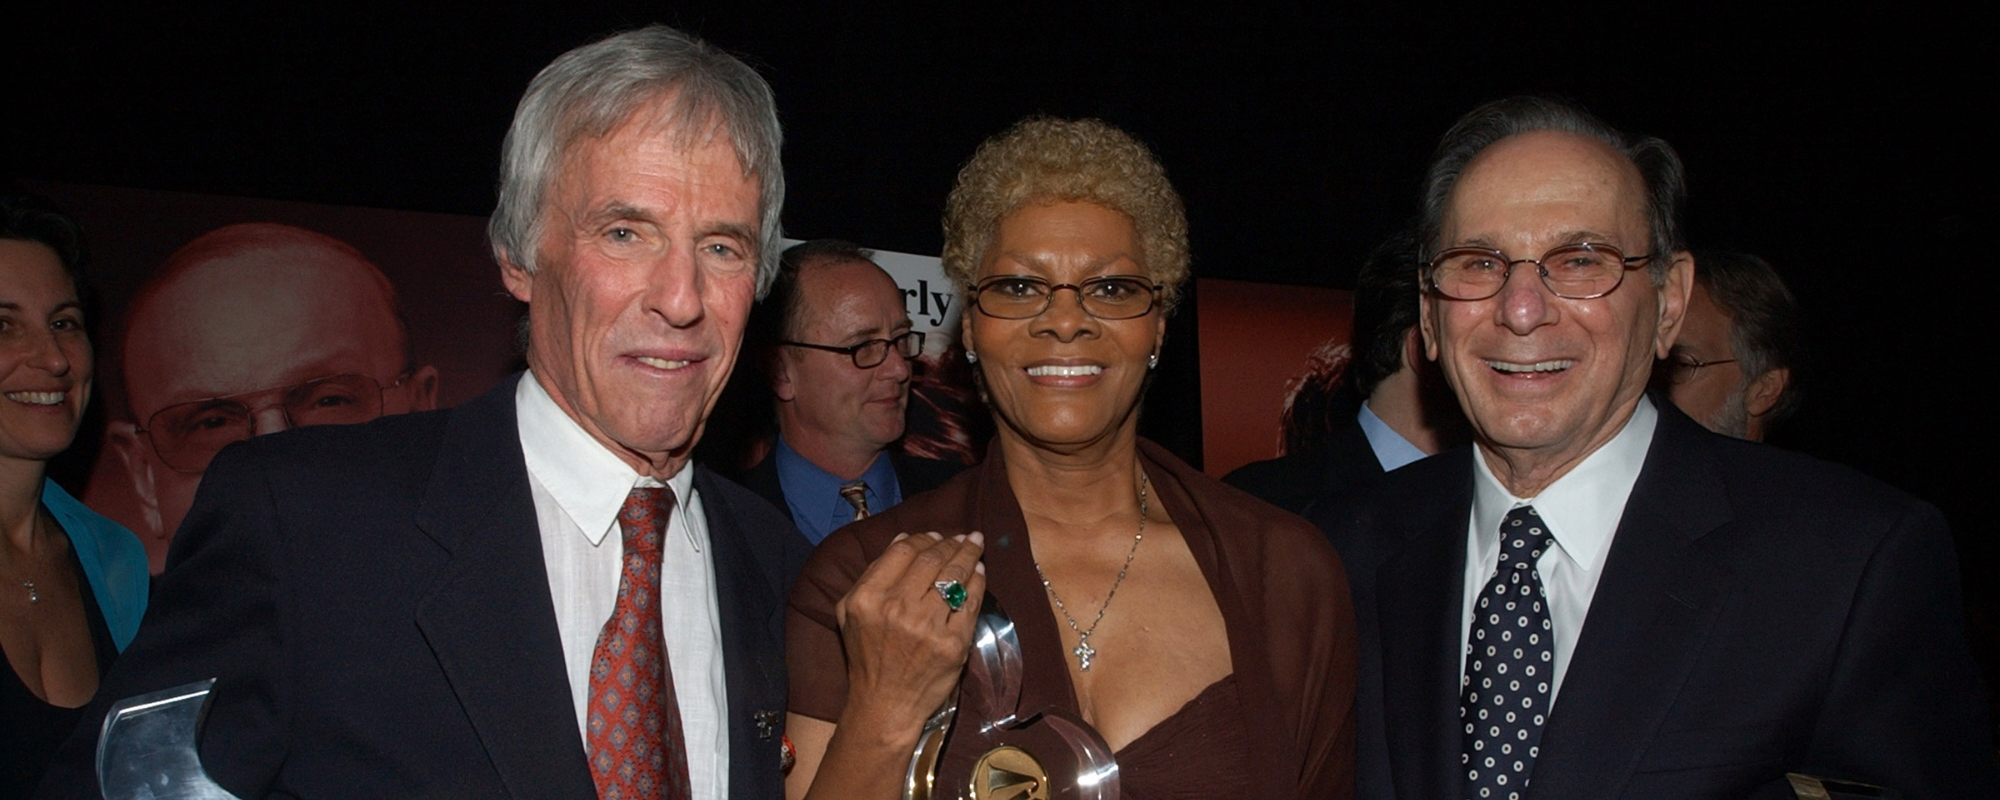 The Songwriting Legacy of Burt Bacharach: His Timeless Hits